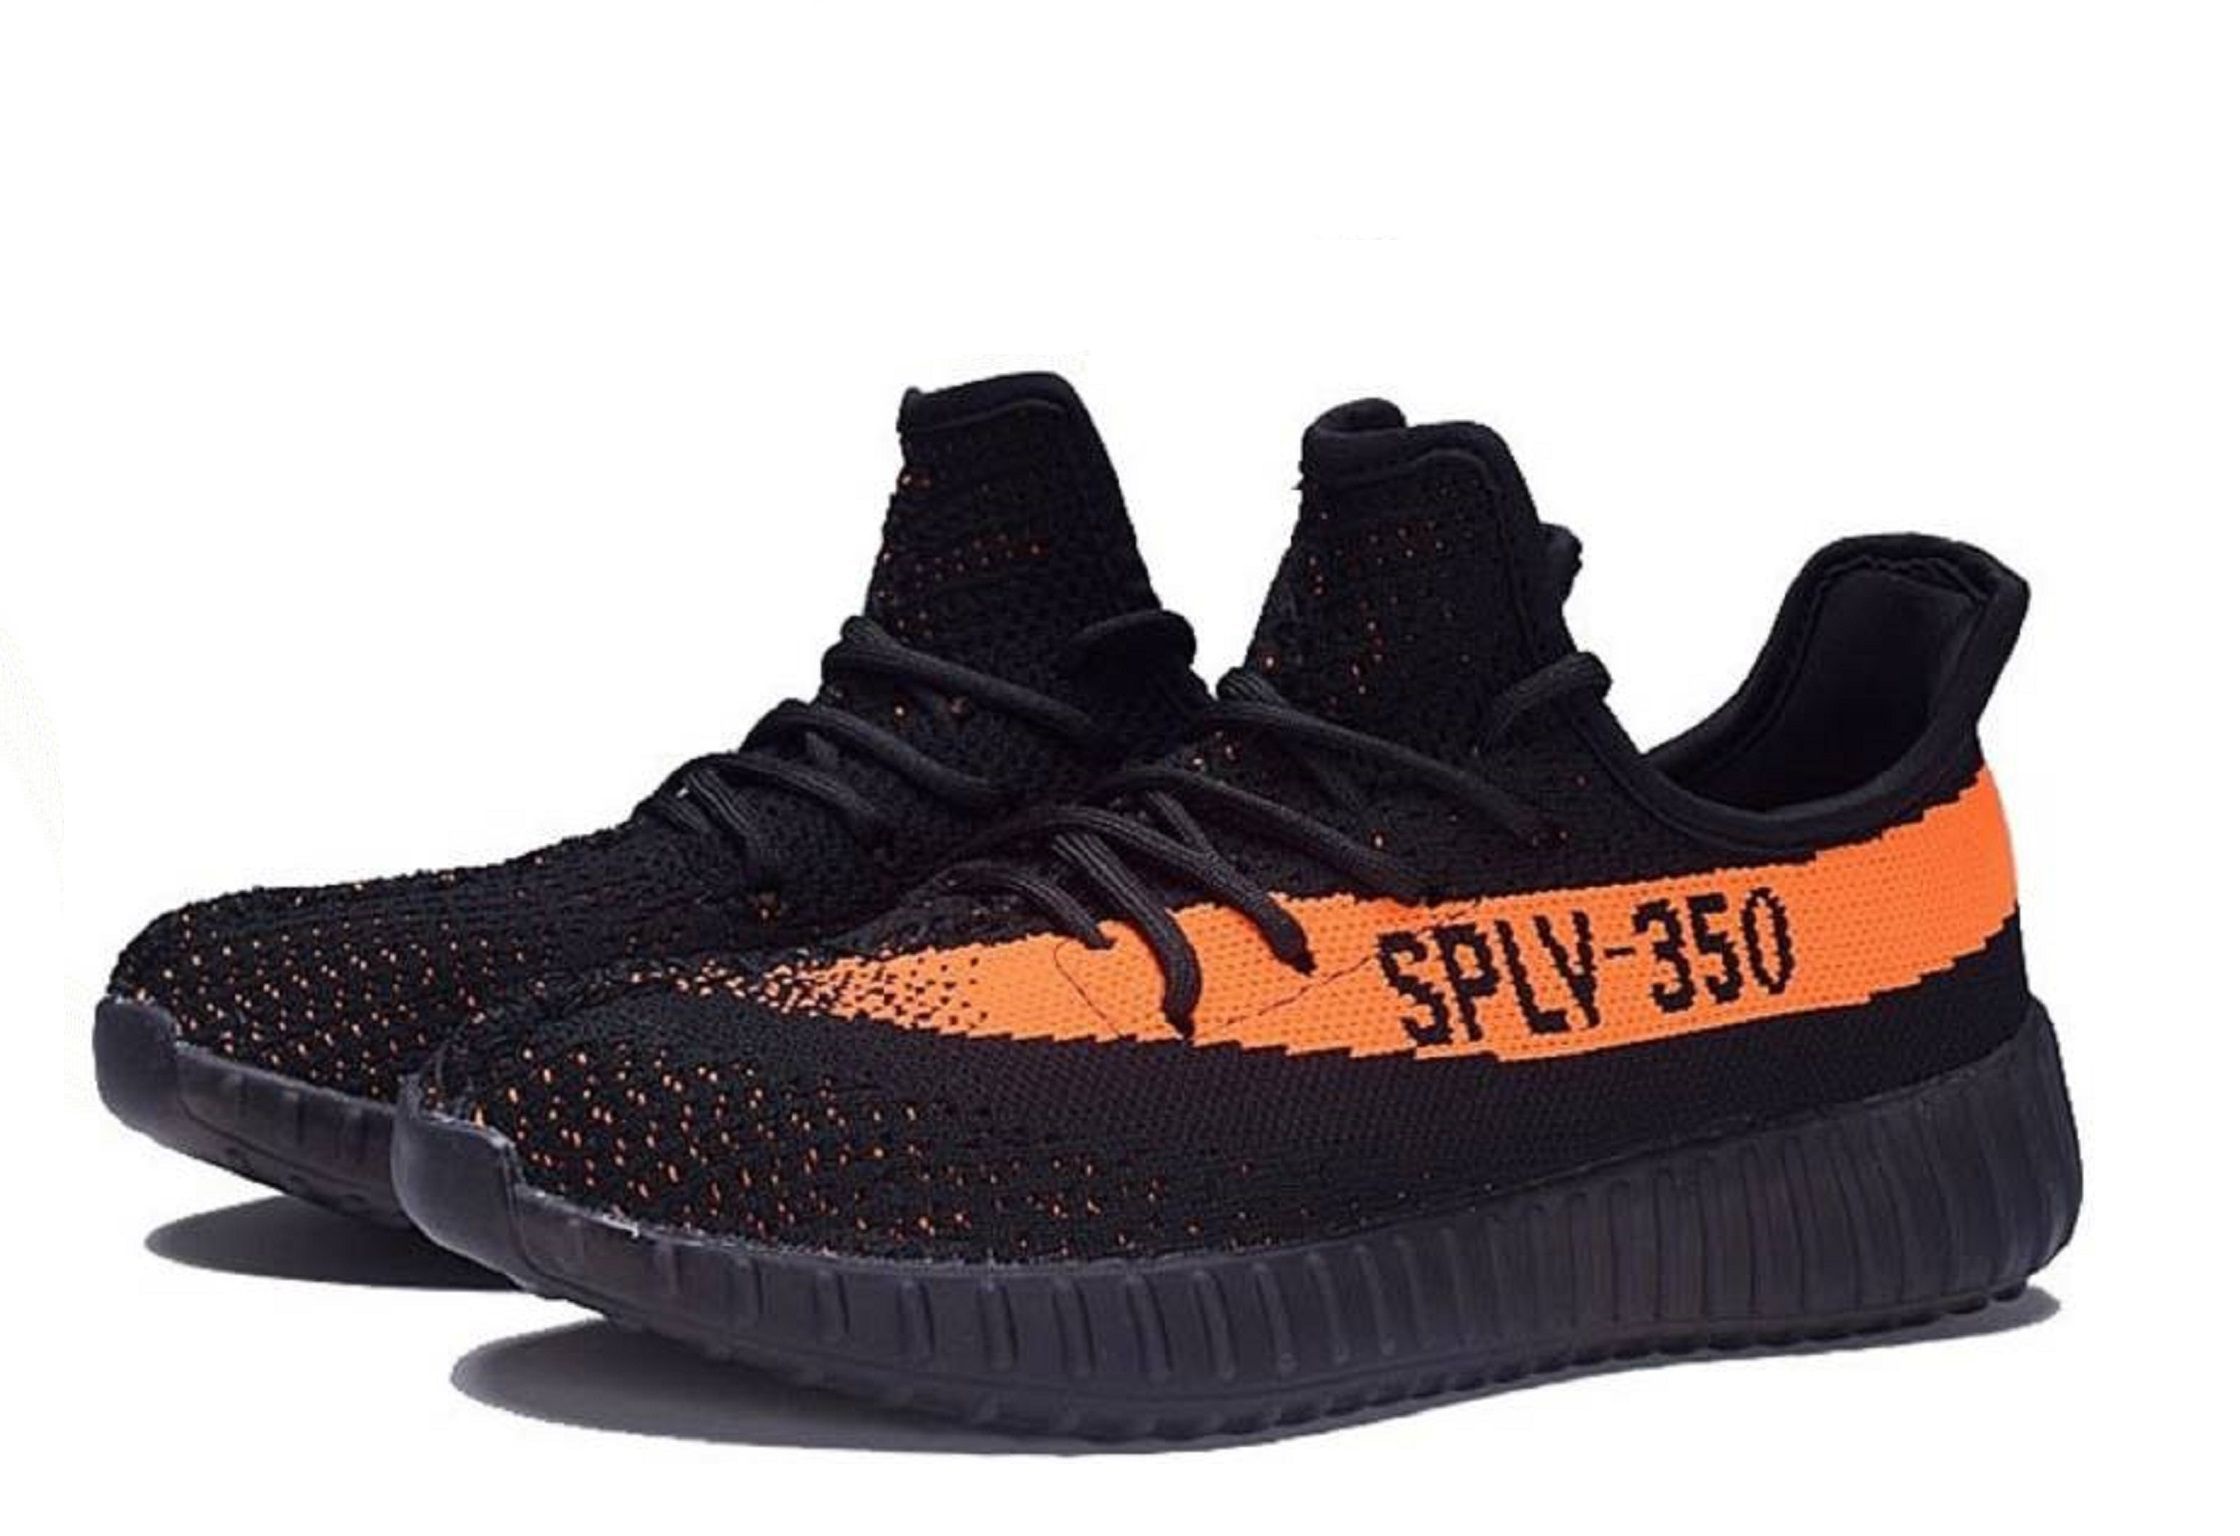 Where can I buy the Adidas yeezy 350 boost shoes for